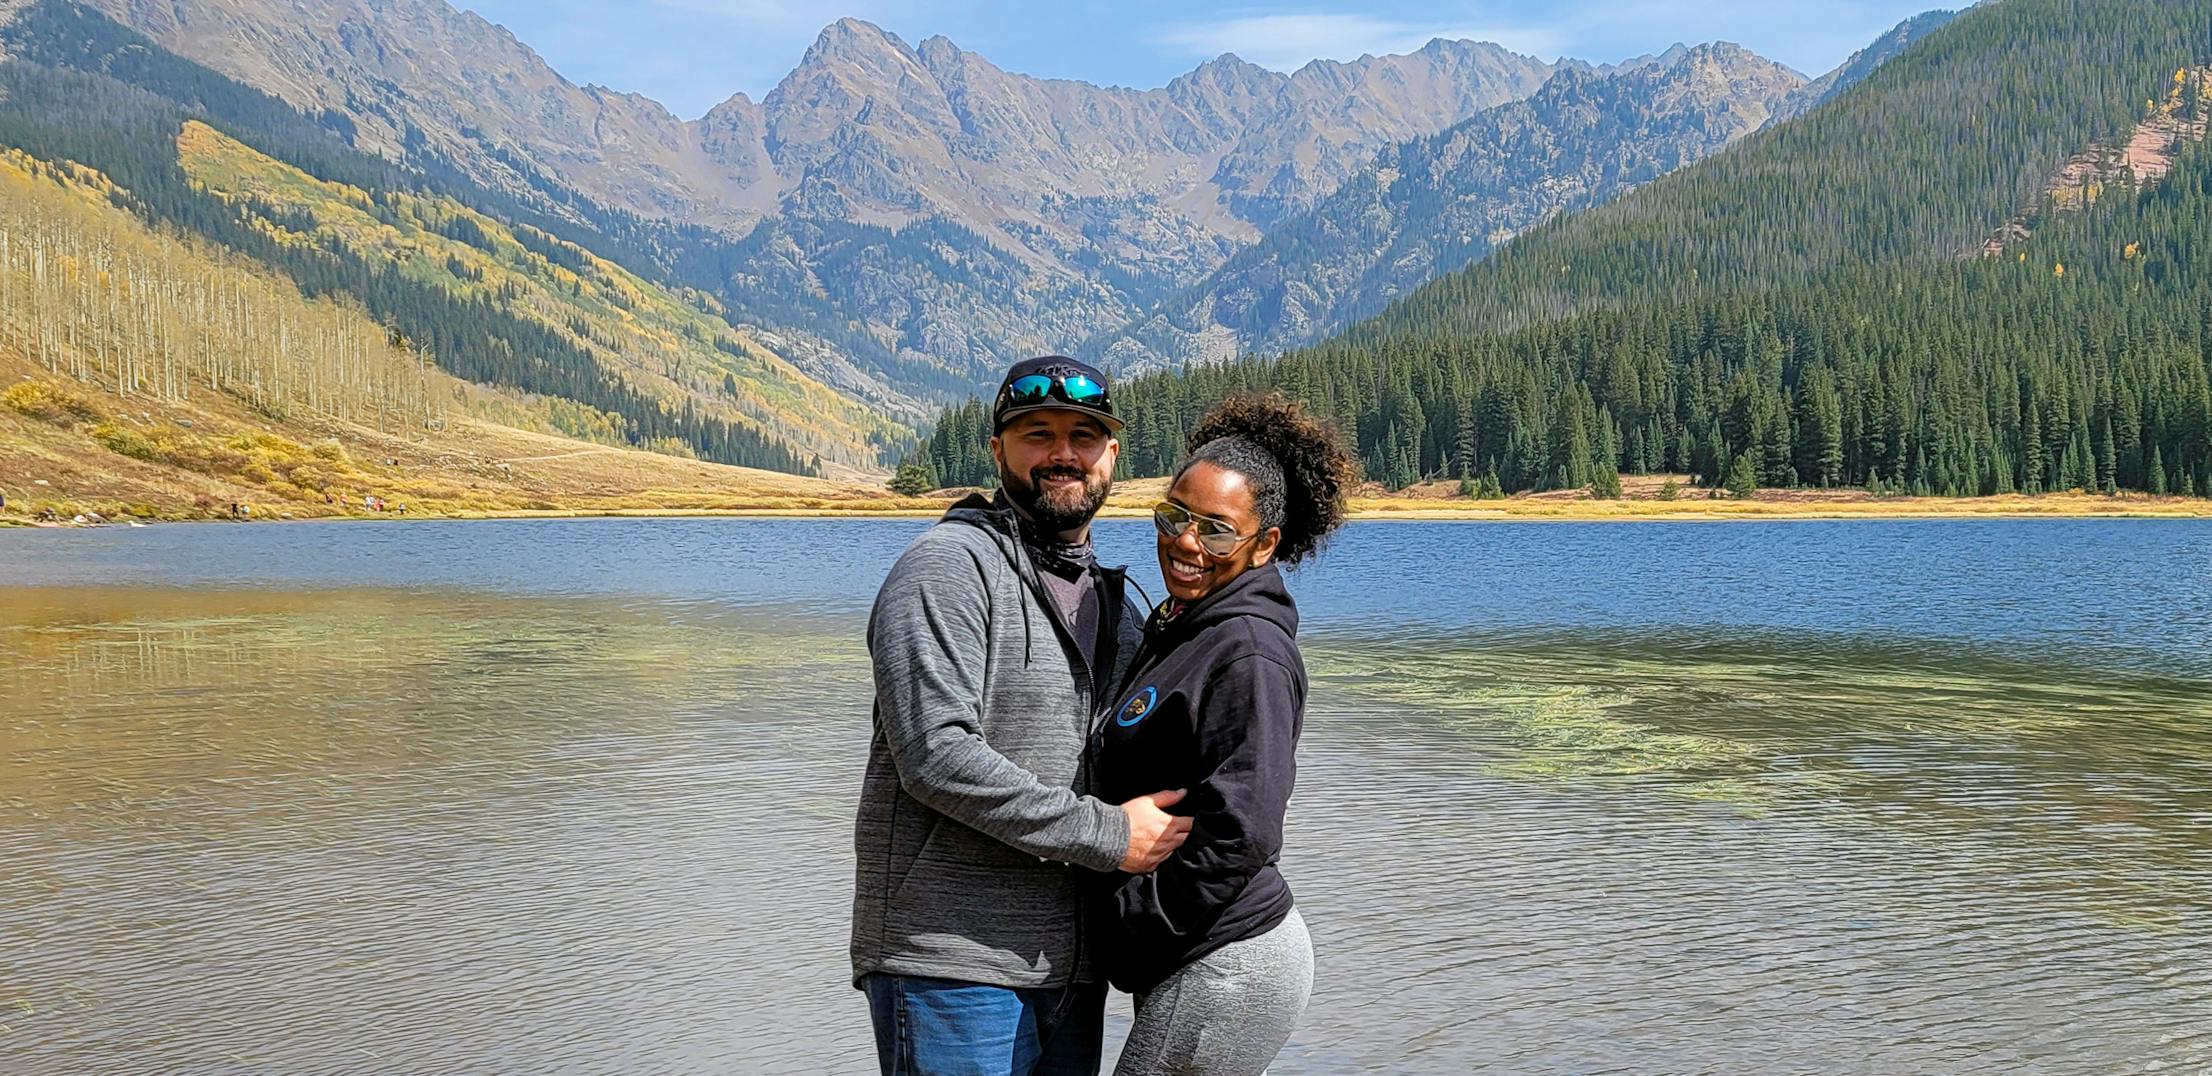 Gabe and Rocio Rivero pose at a scenic outlook featuring a lake, mountains, and forest.